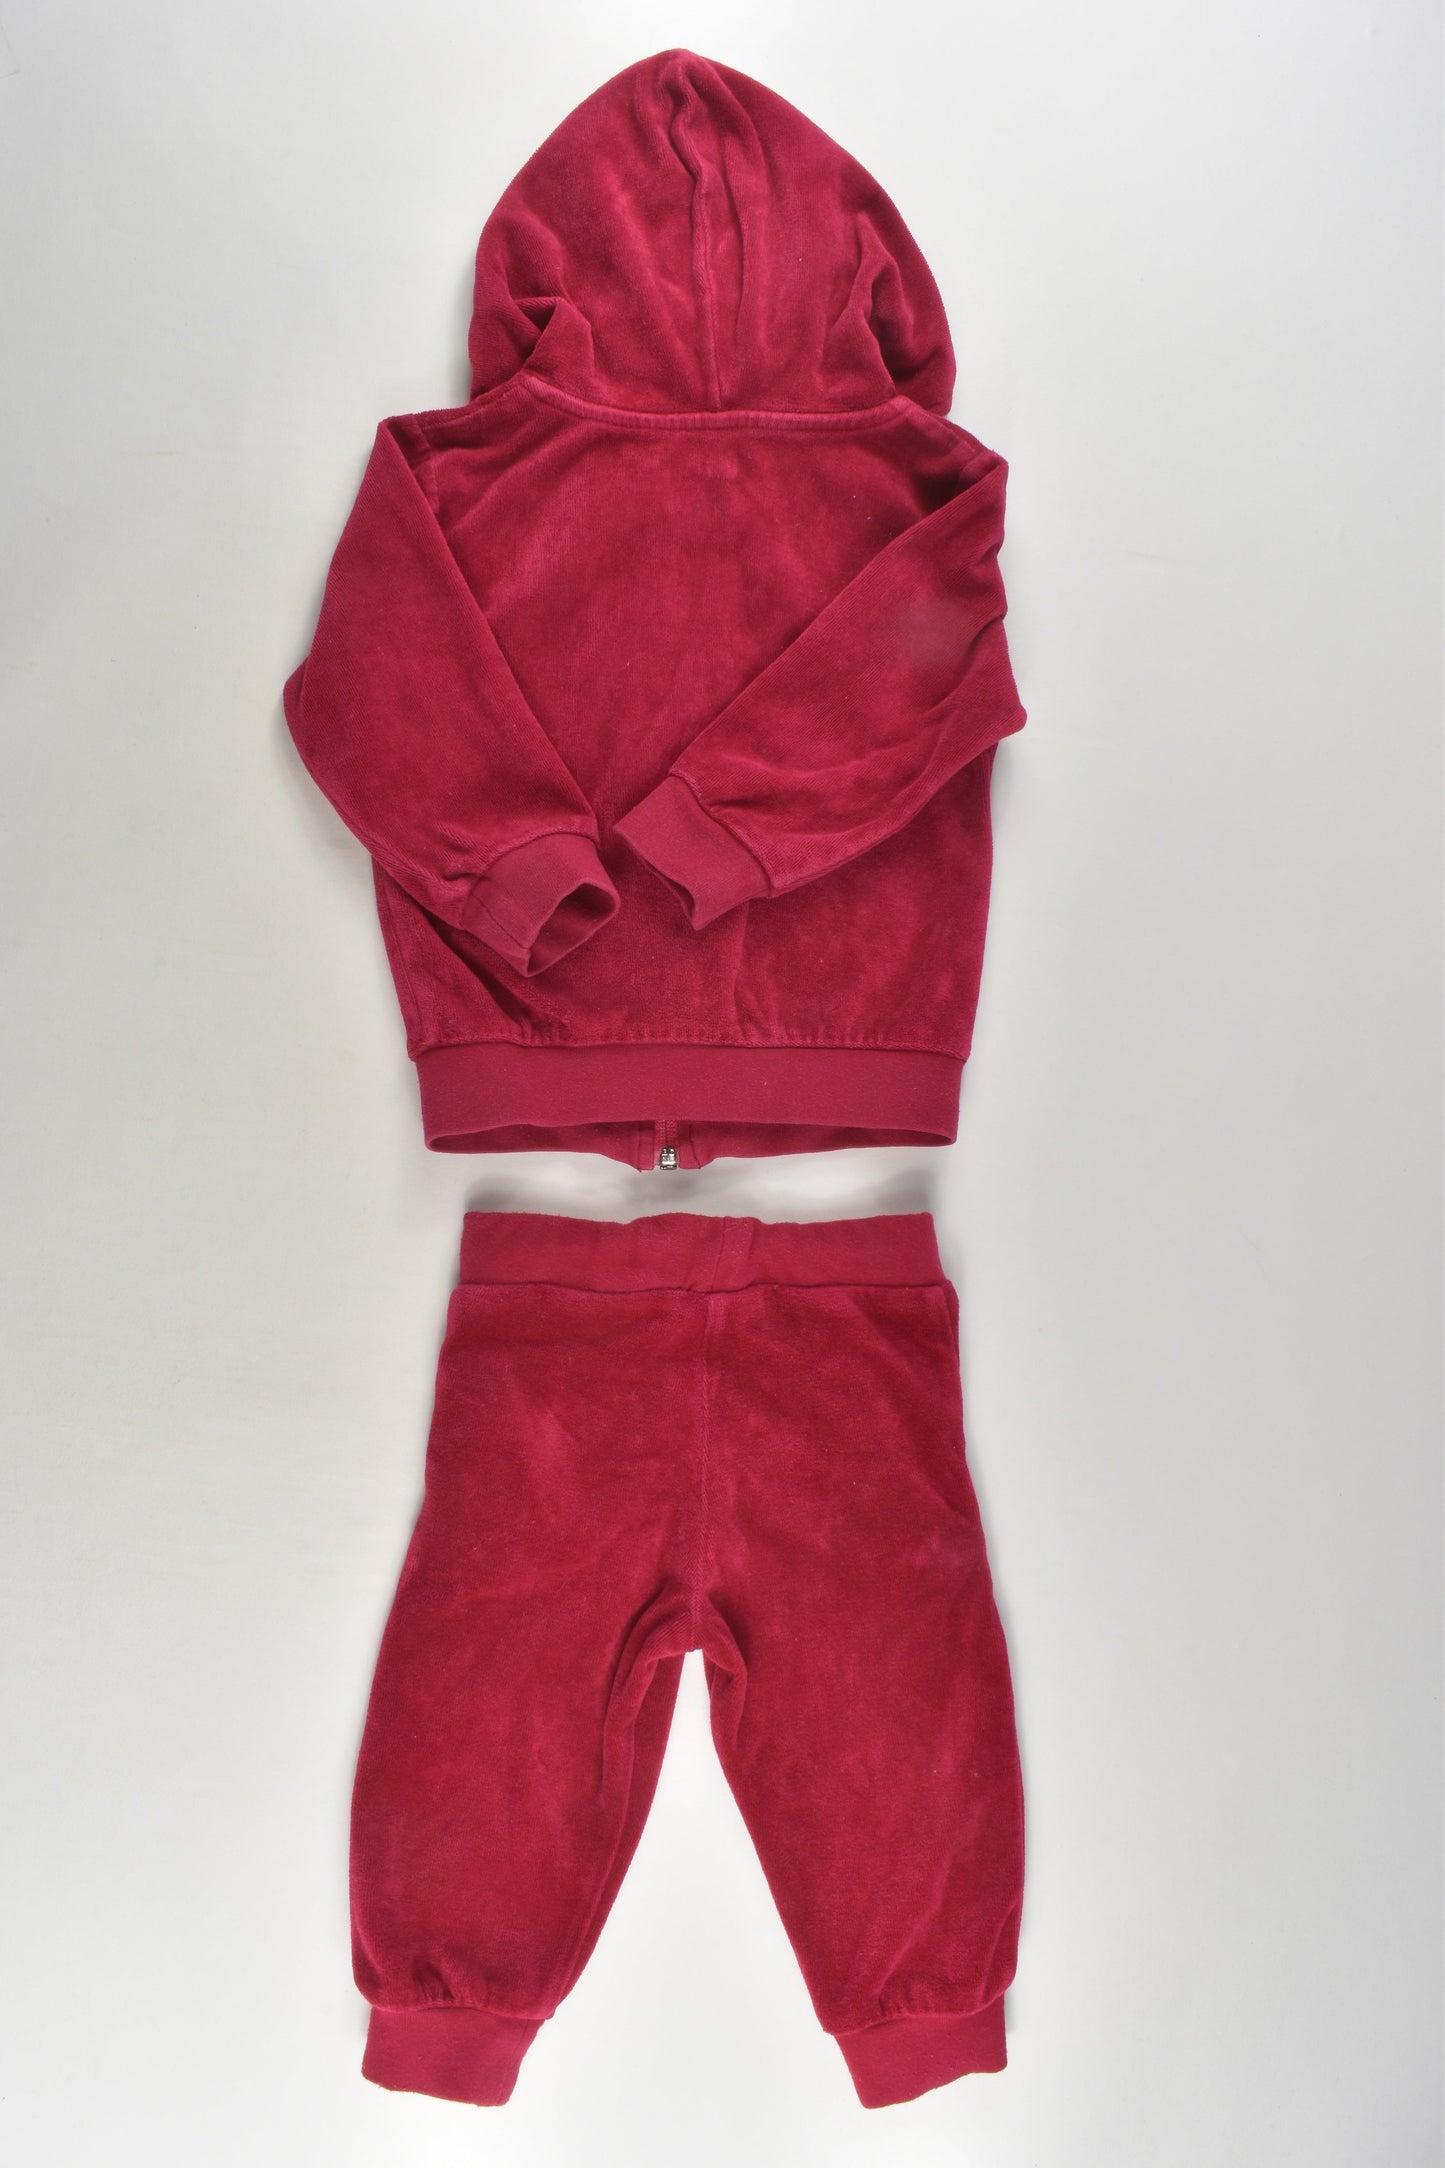 Finnwear Size 00 (68 cm) Velour Outfit